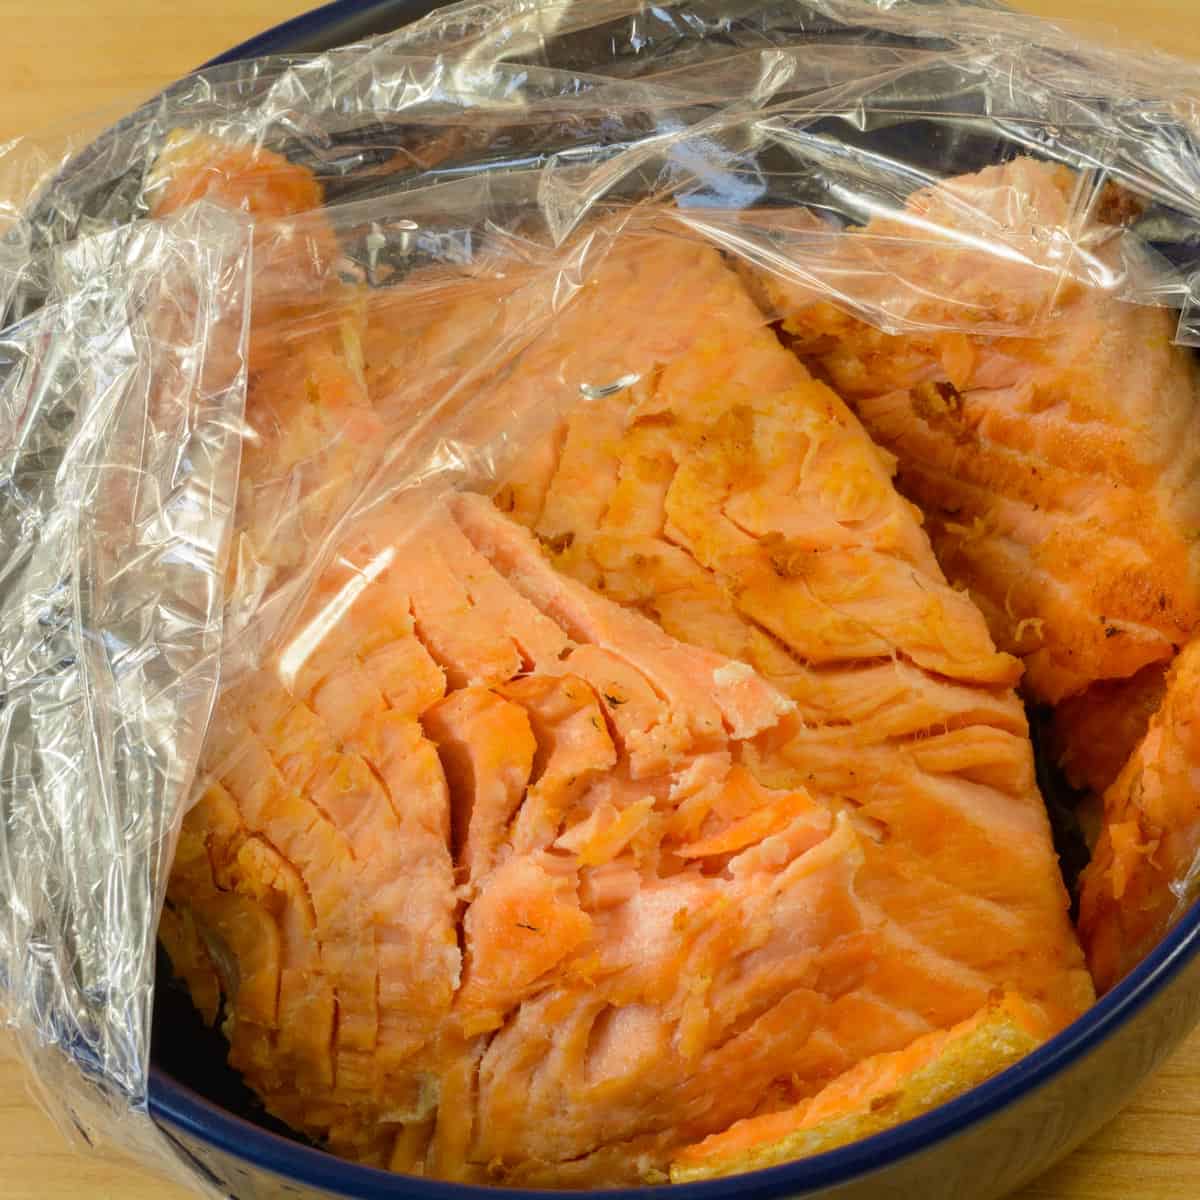 Leftover baked salmon in a blue bowl with some plastic wrap on it.